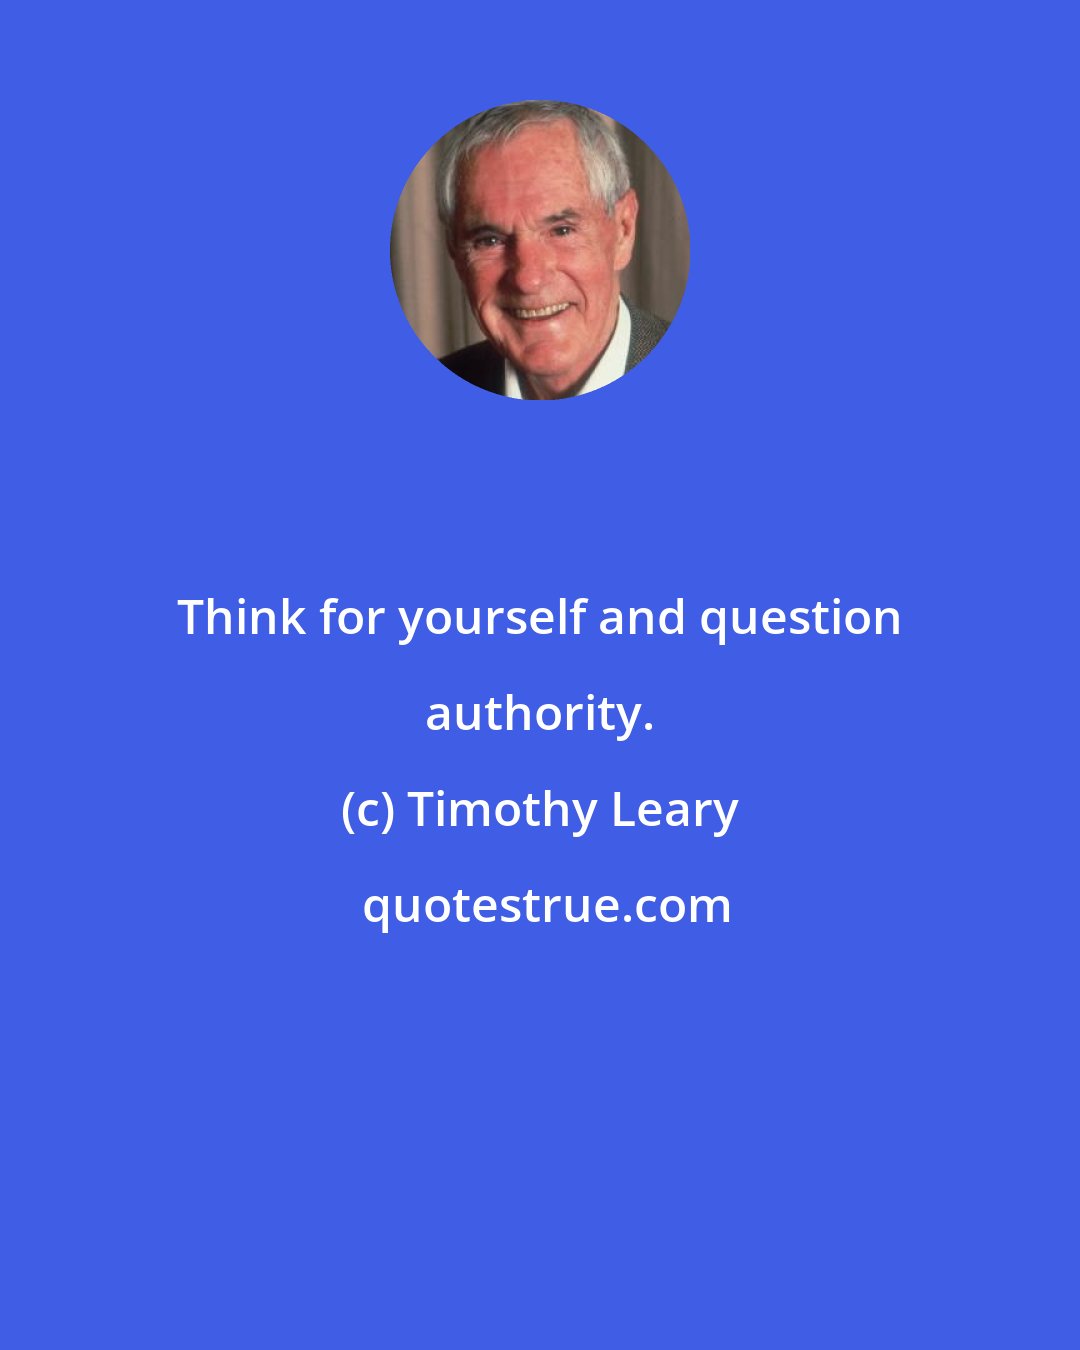 Timothy Leary: Think for yourself and question authority.